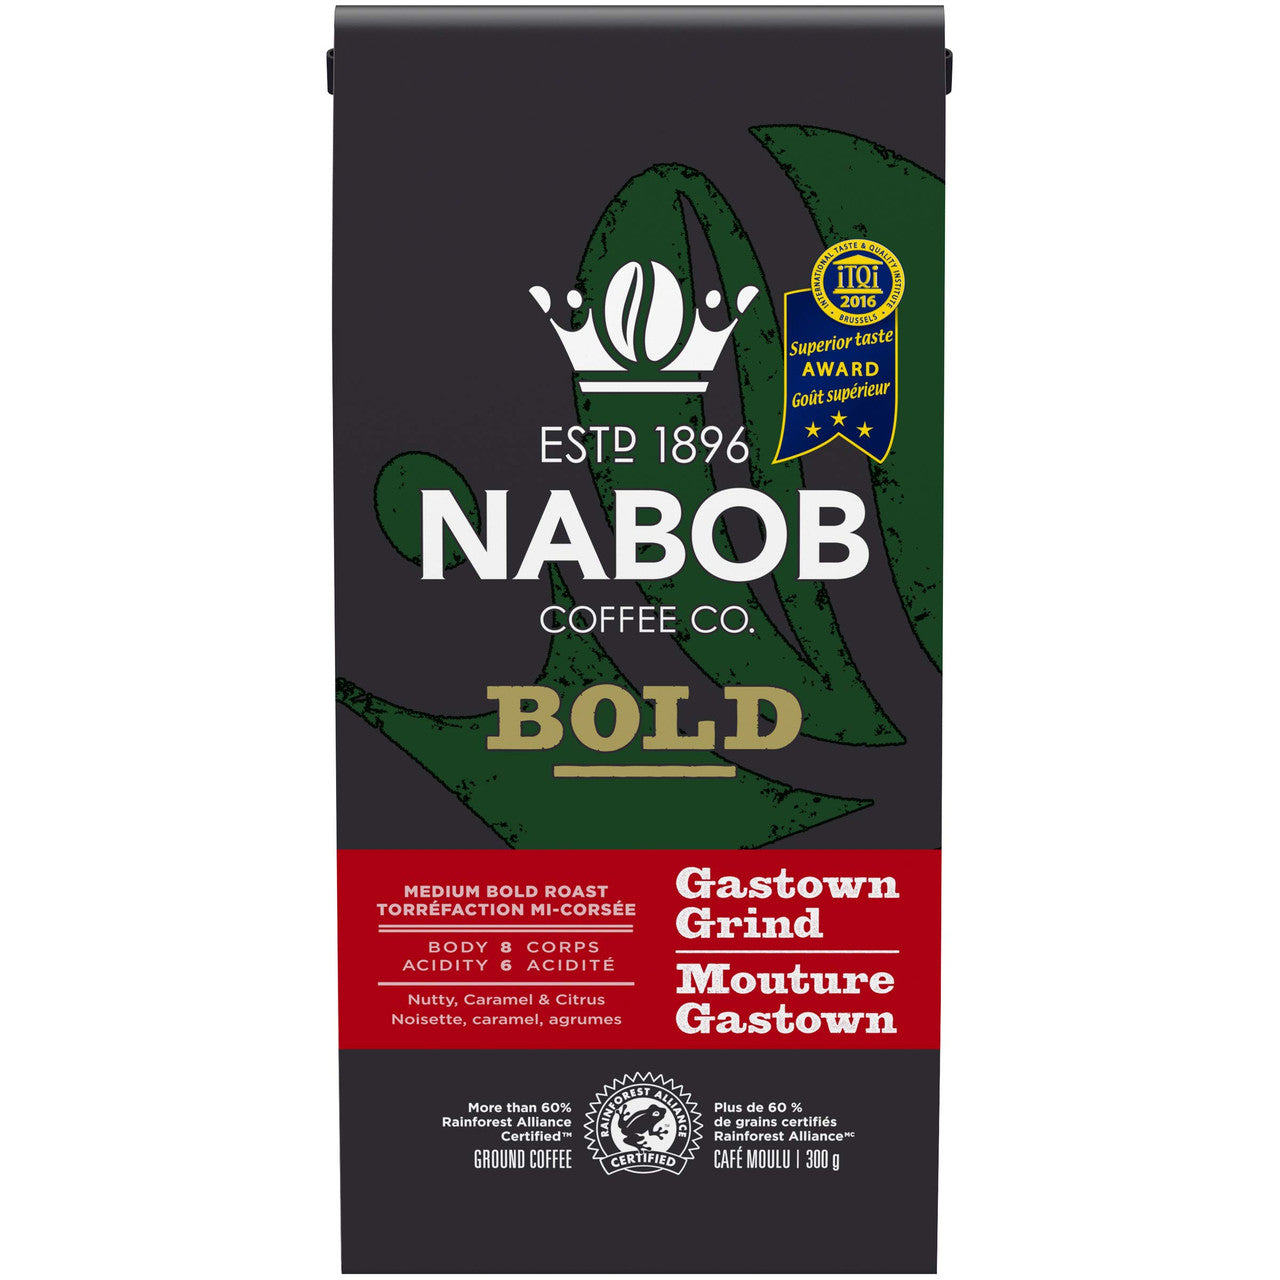 Nabob Bold Gastown Grind Ground Coffee, 300g/10.6 oz. (Pack of 6) {Imported from Canada}